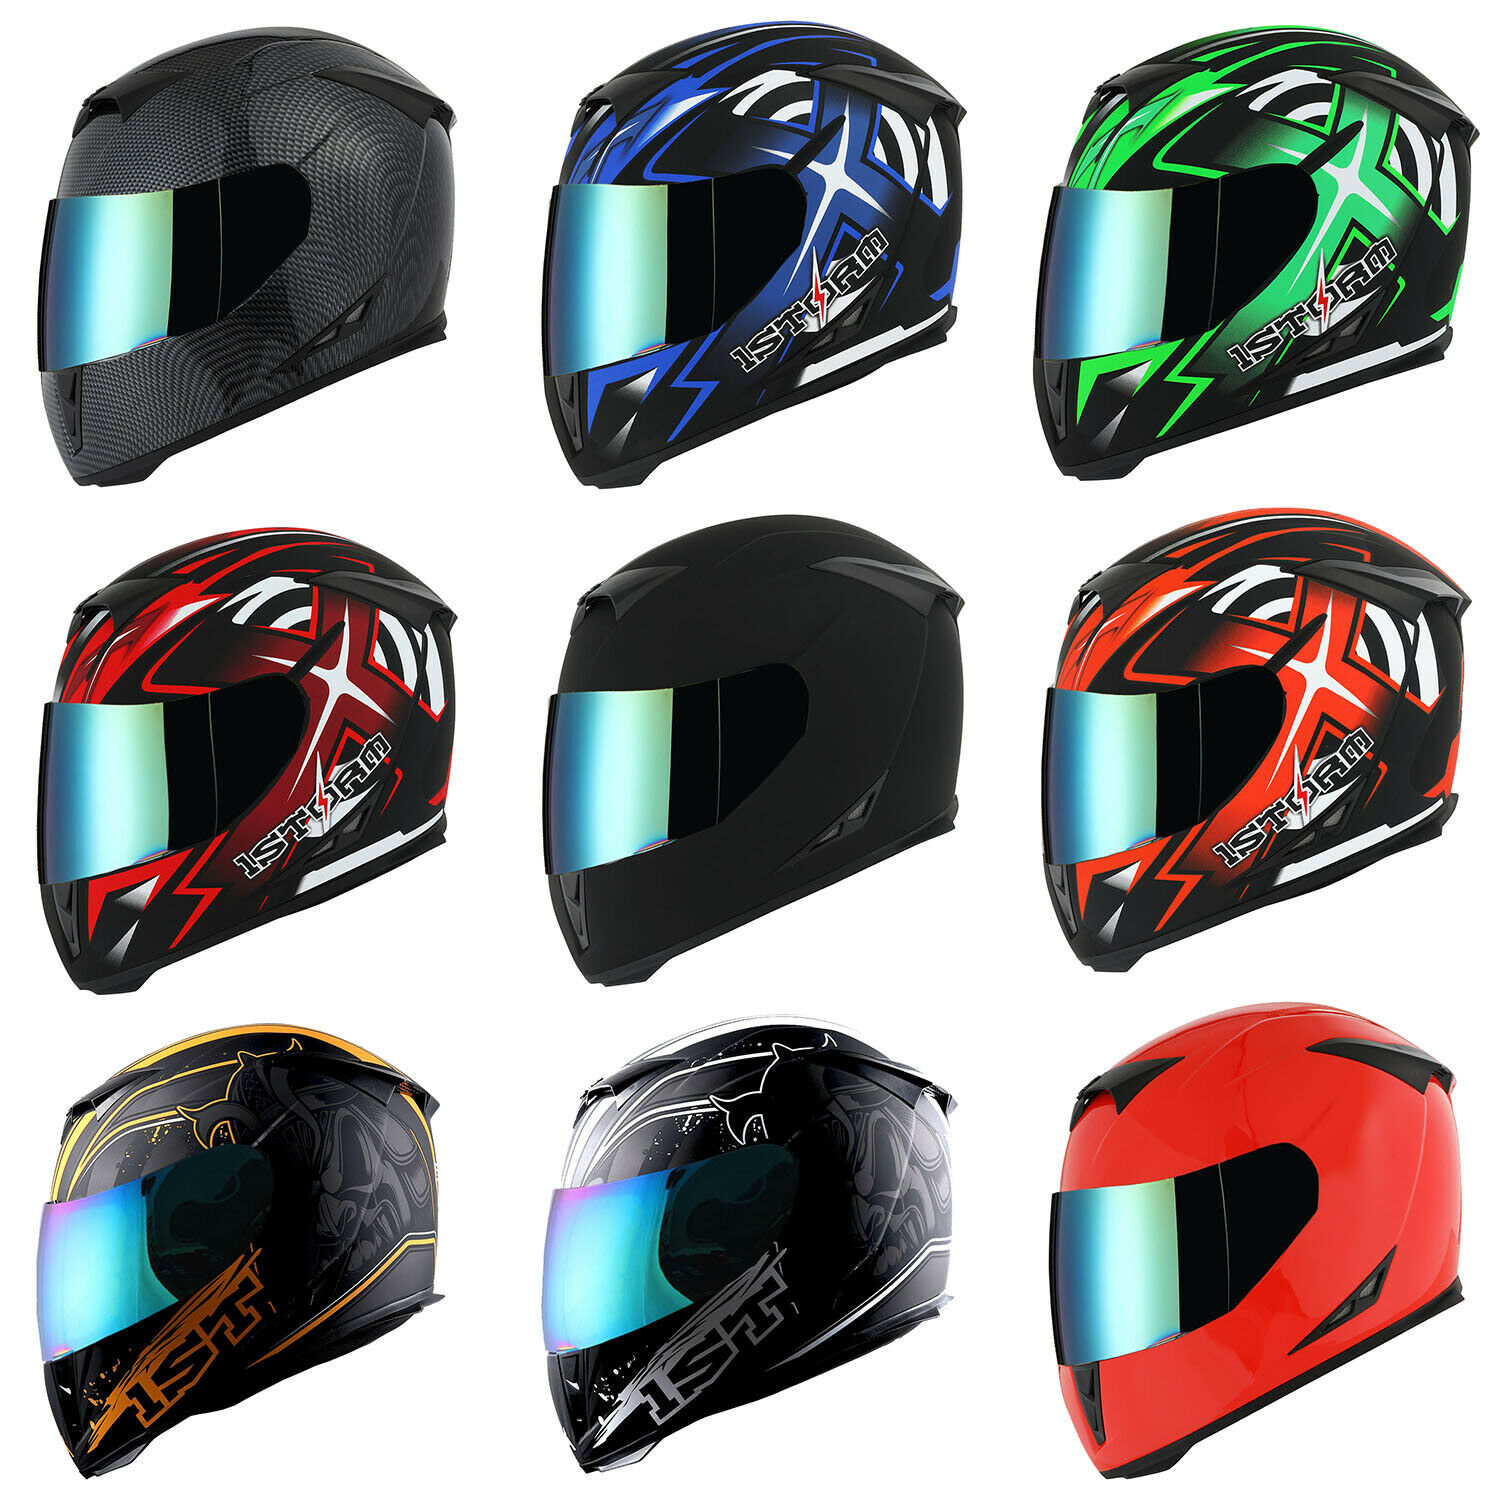 New 1storm Adult Motorcycle Full Face Helmet Skull King + One Extra Clear Shield